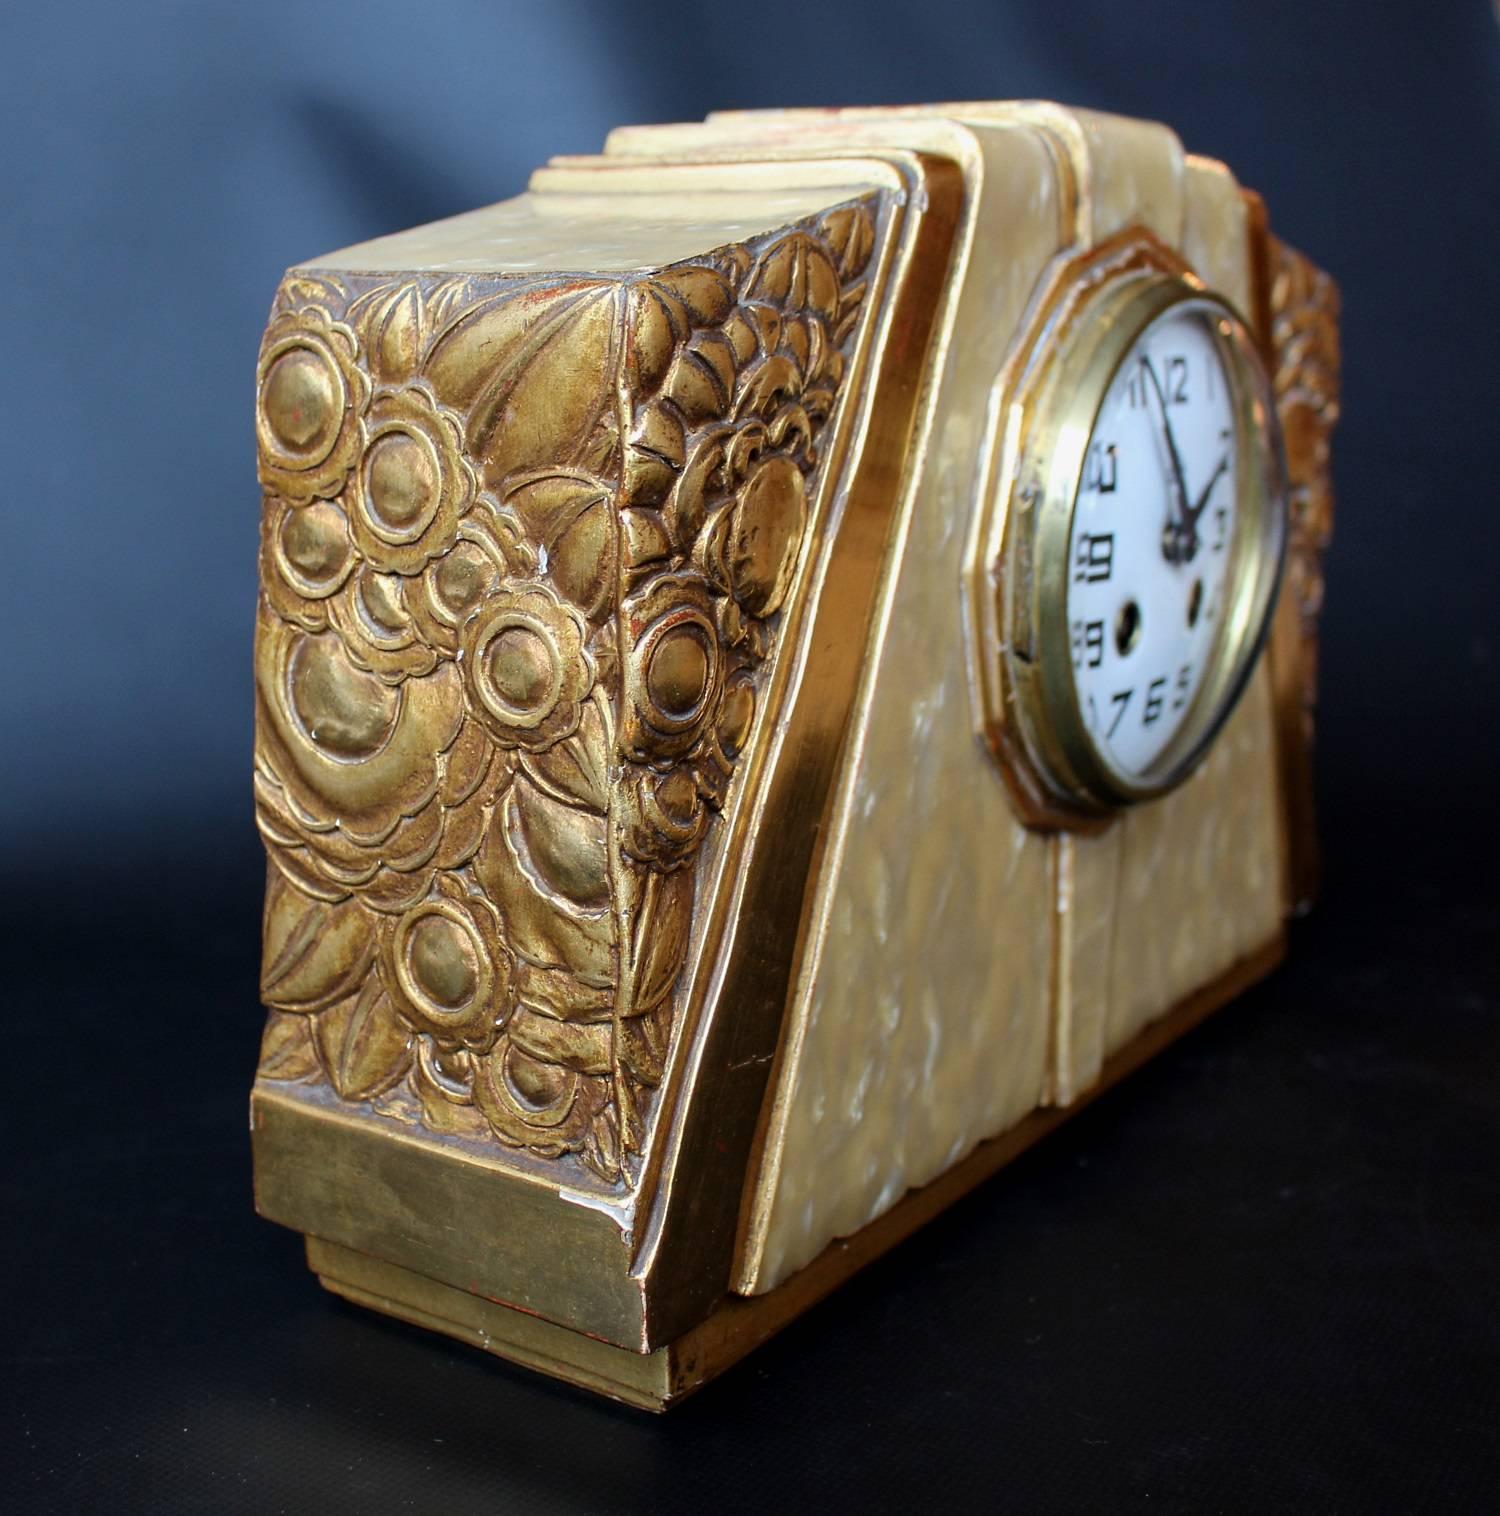 An Art Deco mantel clock attributed to Süe et Mare - Louis Süe (1875-1968) and André Mare (1887-1932). Bakelite and giltwood carved with stylized flowers. 8 day movement.

 